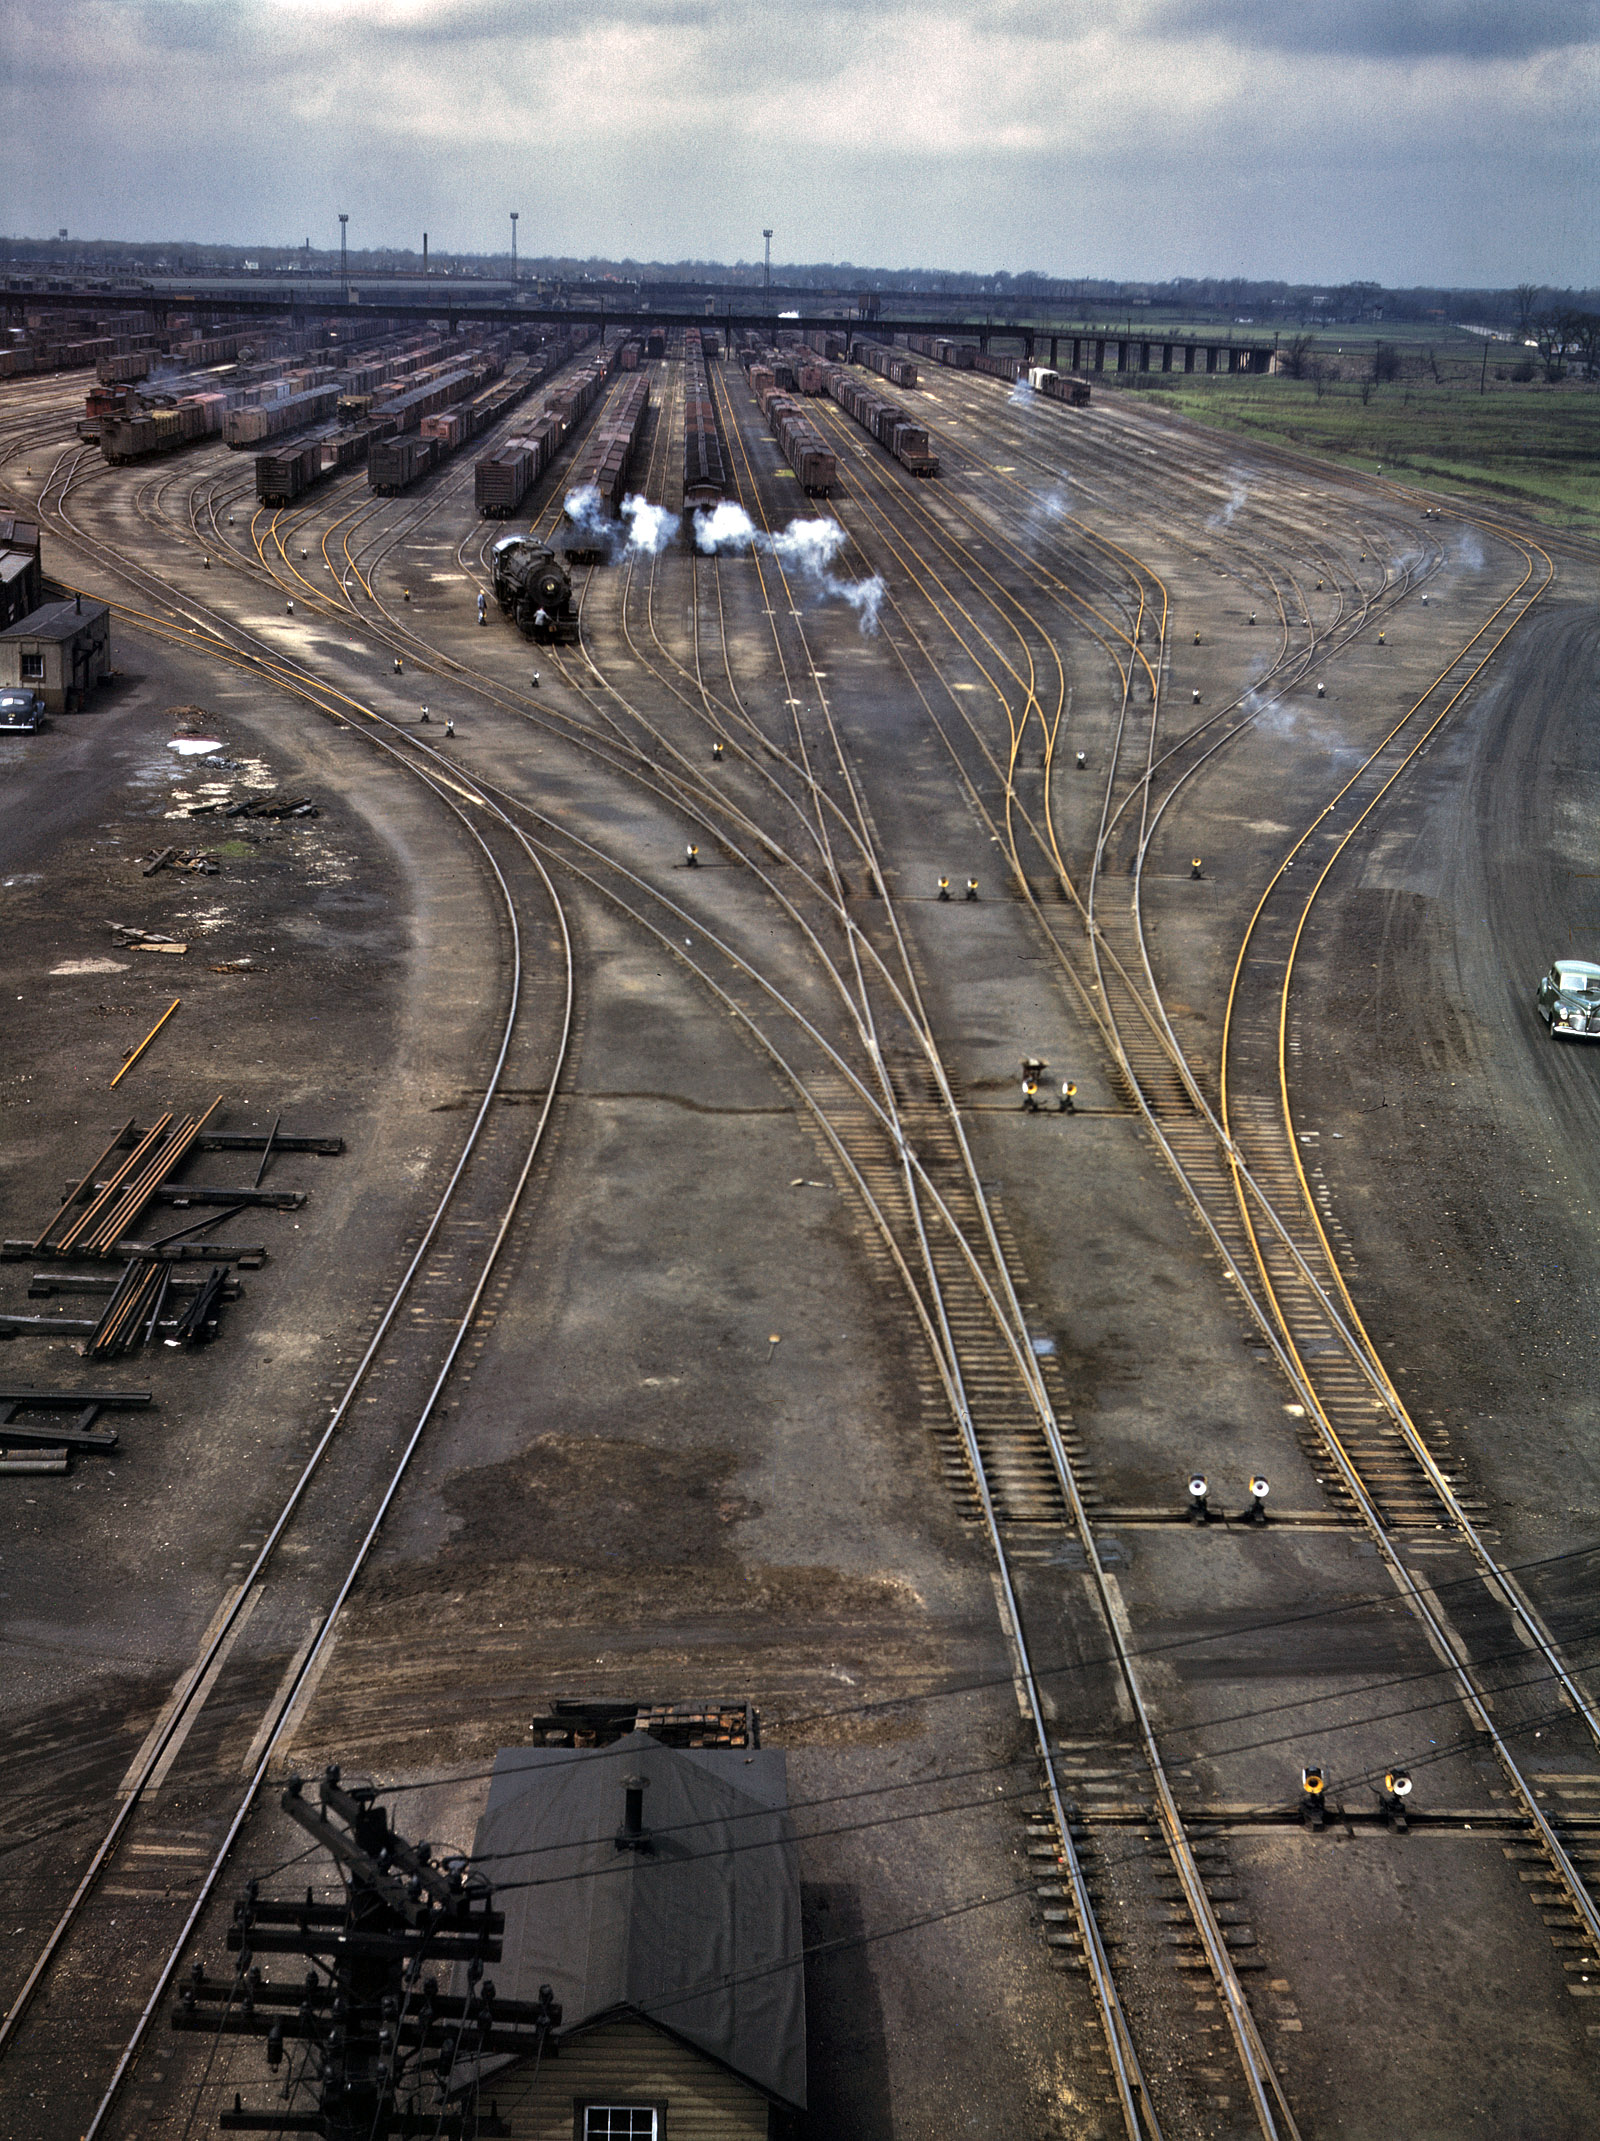 Chicago, April 1943. More of those yellow Proviso rails. "General view of one of the departure yards at Chicago & North Western RR's Proviso Yard." 4x5 Kodachrome transparency by Jack Delano for the OWI. View full size.